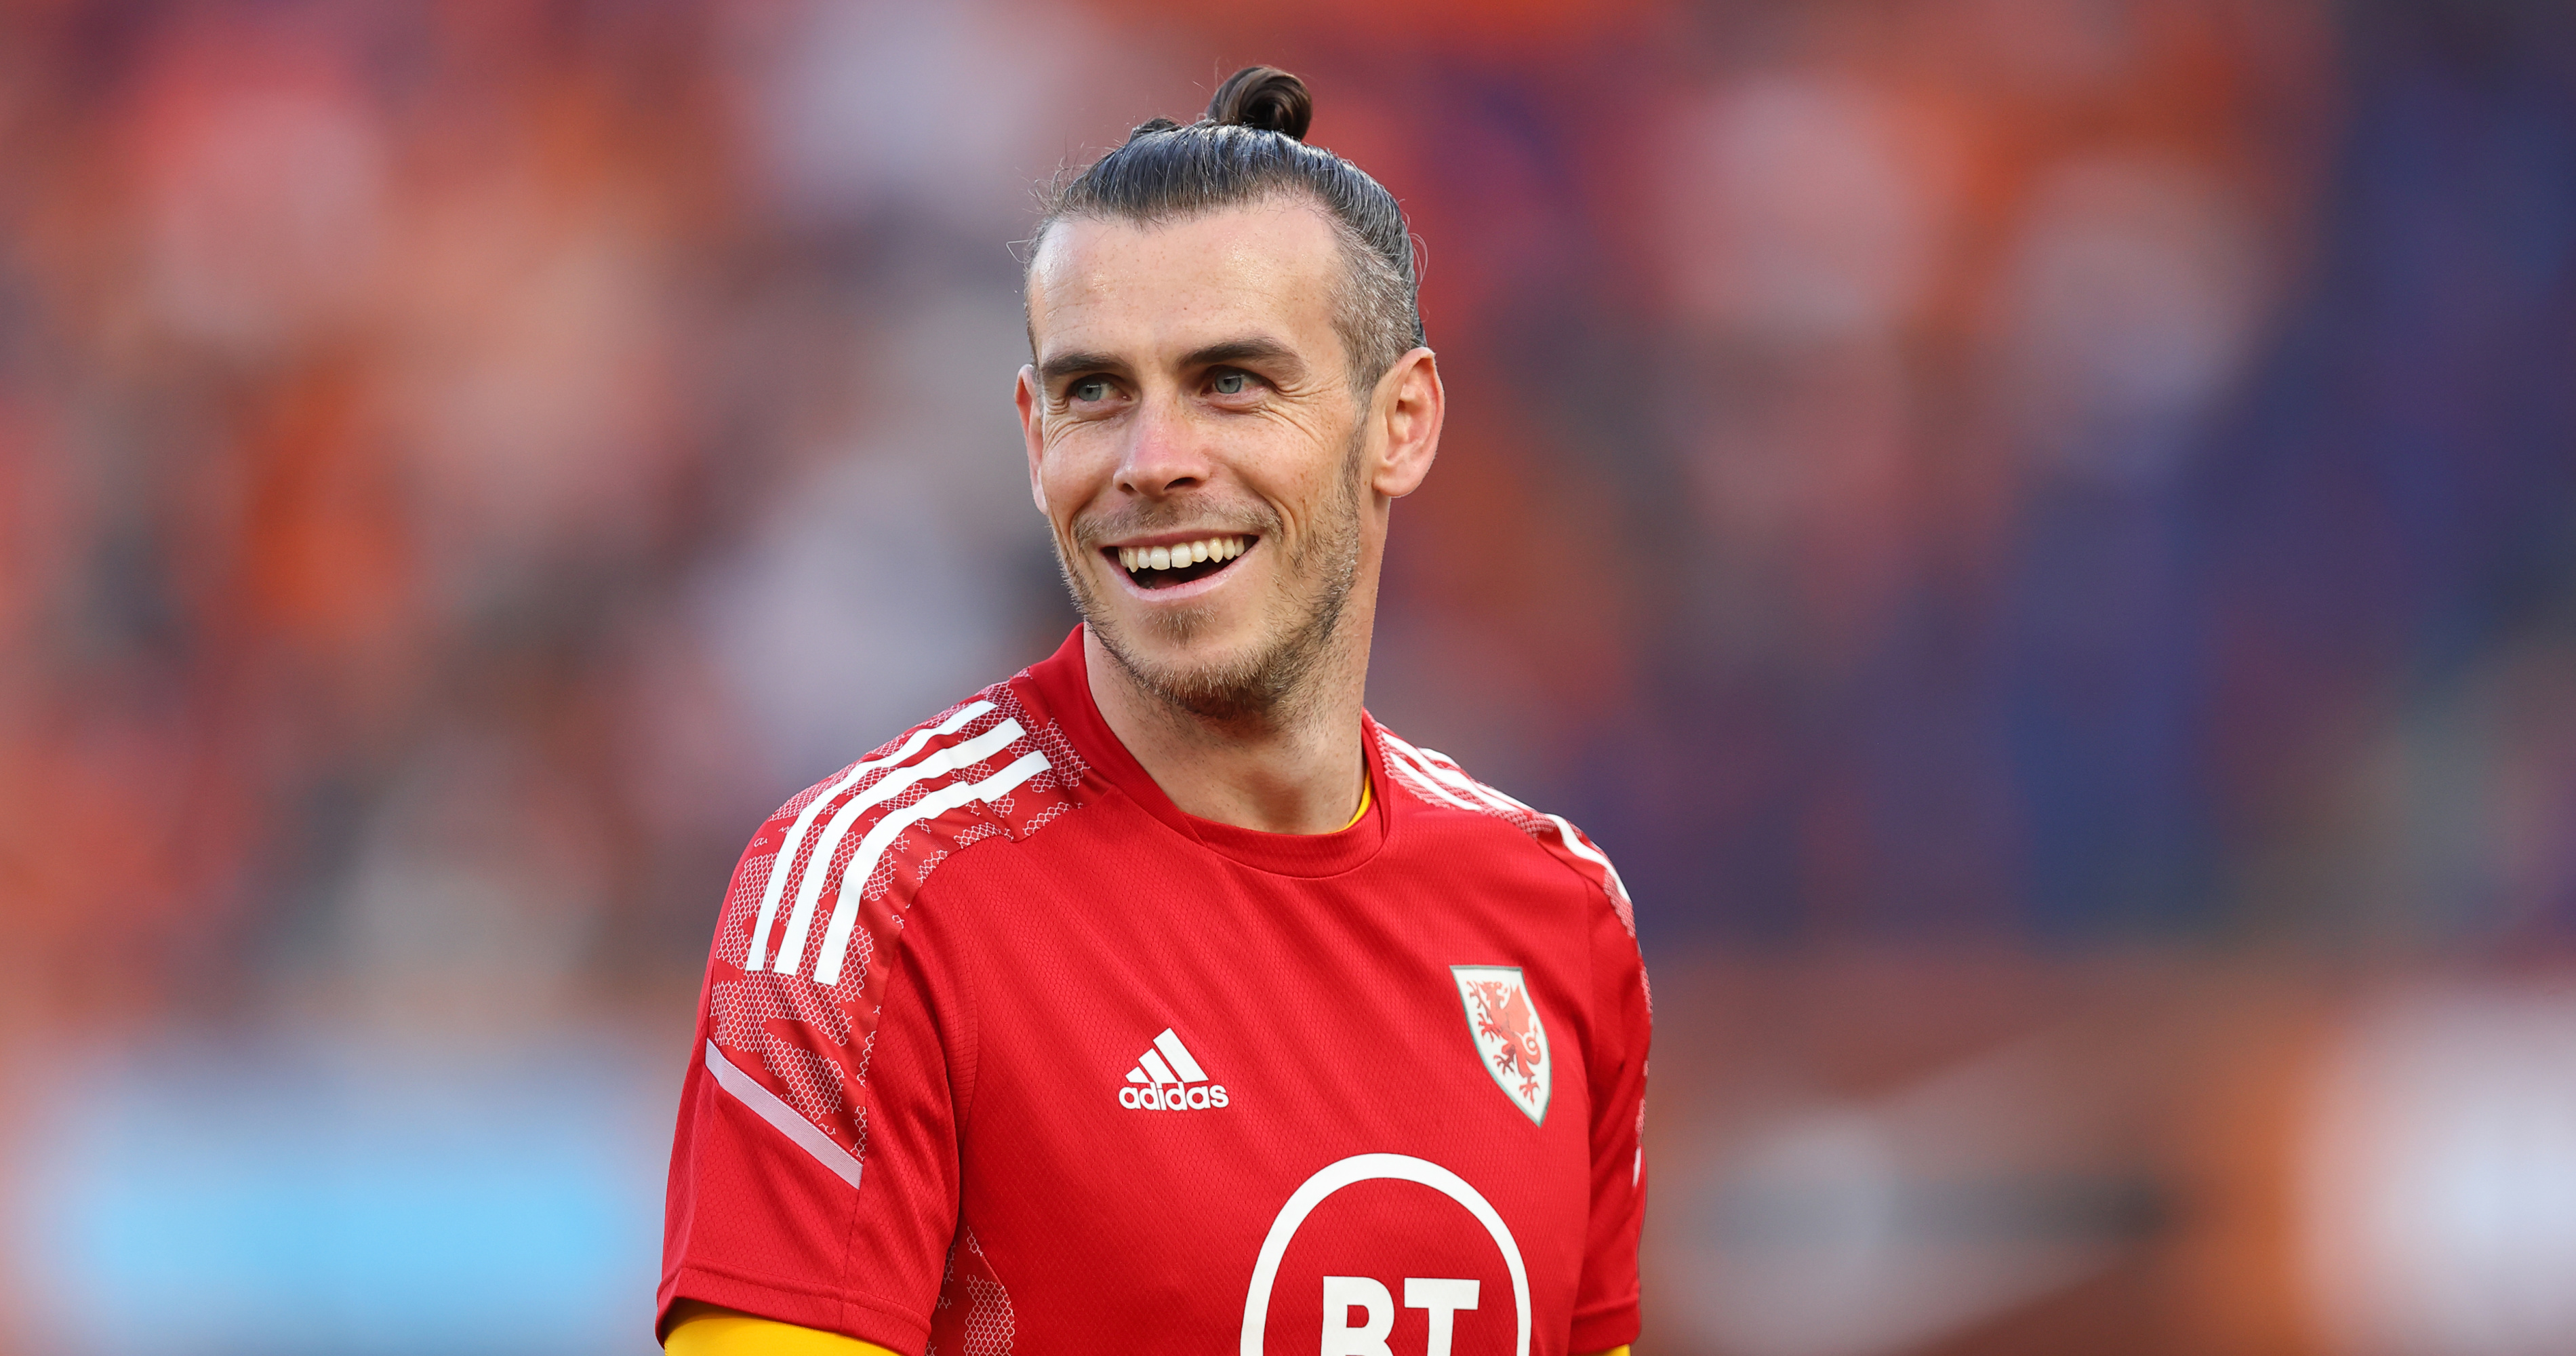 Gareth Bale agrees shock transfer to MLS side LAFC on free